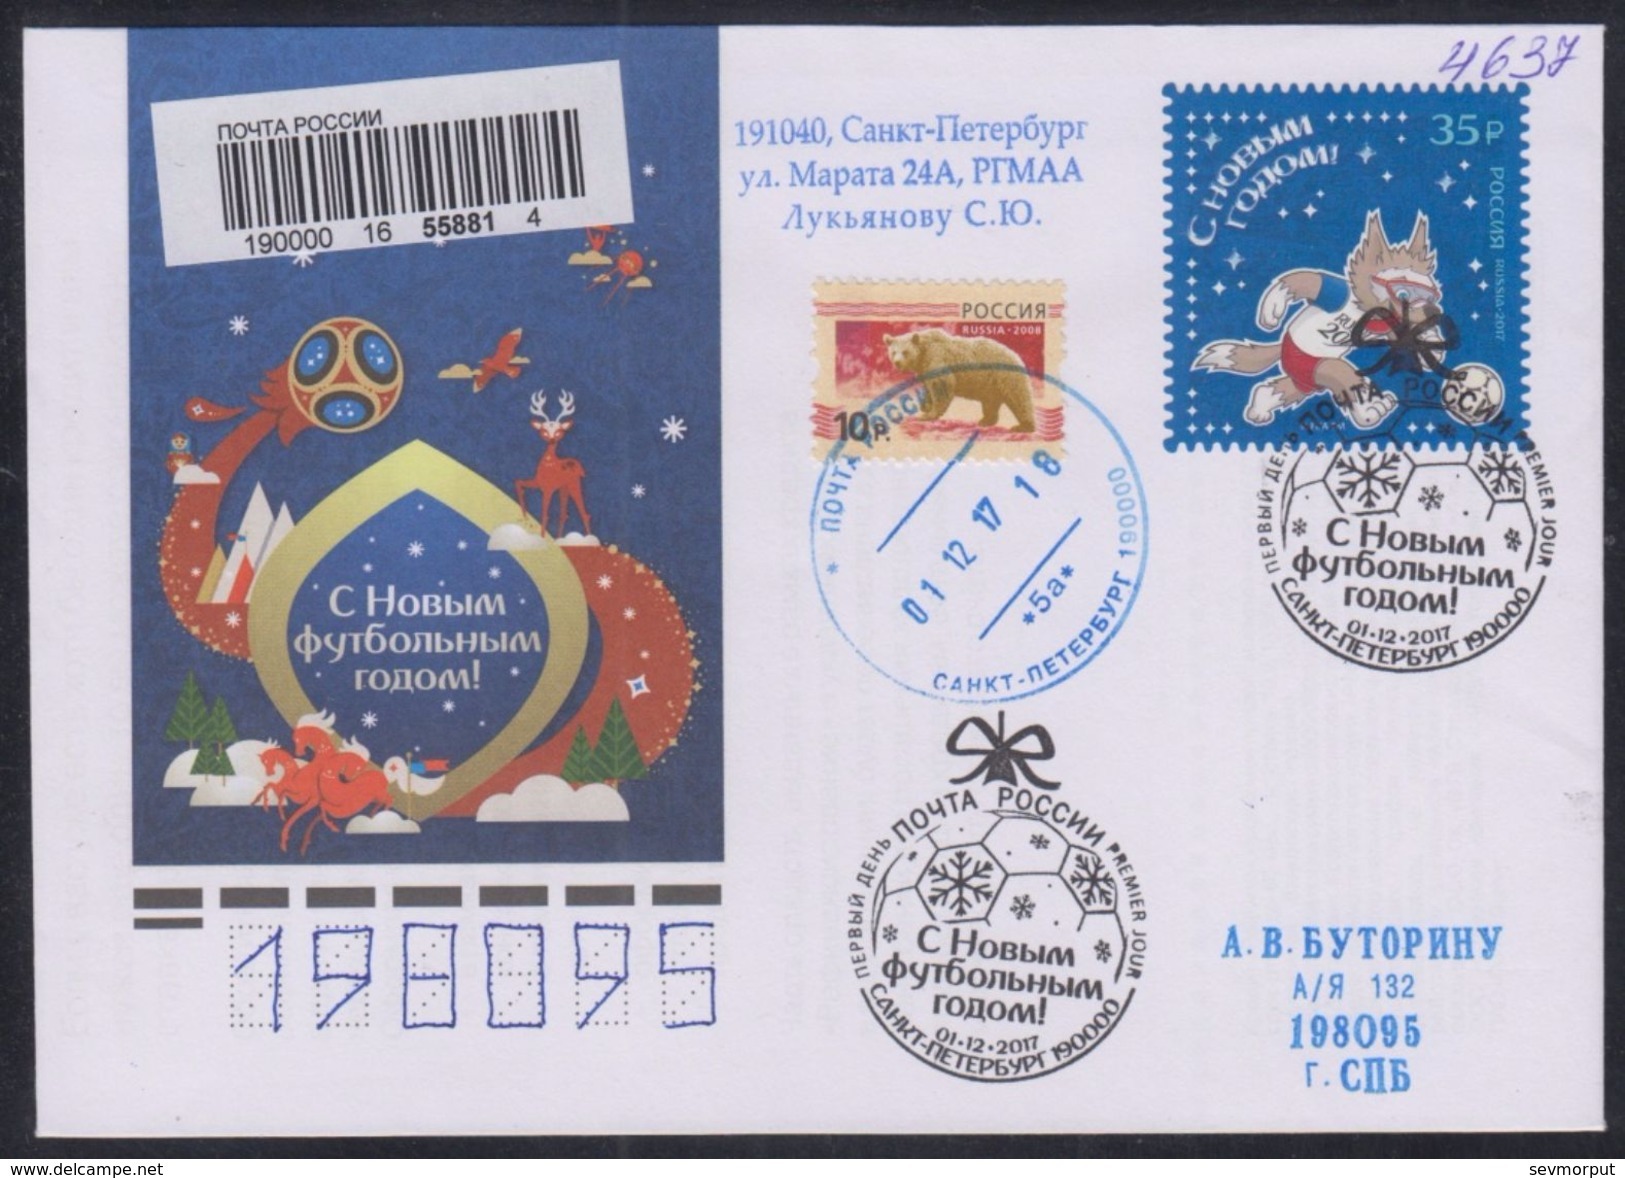 RUSSIA 2017 COVER Used FDC 1996 Set 3 WORLD CUP 2018 FOOTBALL SOCCER "Zabivaka" MASCOT WOLF LOUP NEW YEAR 2294-96 Mailed - 2018 – Russie